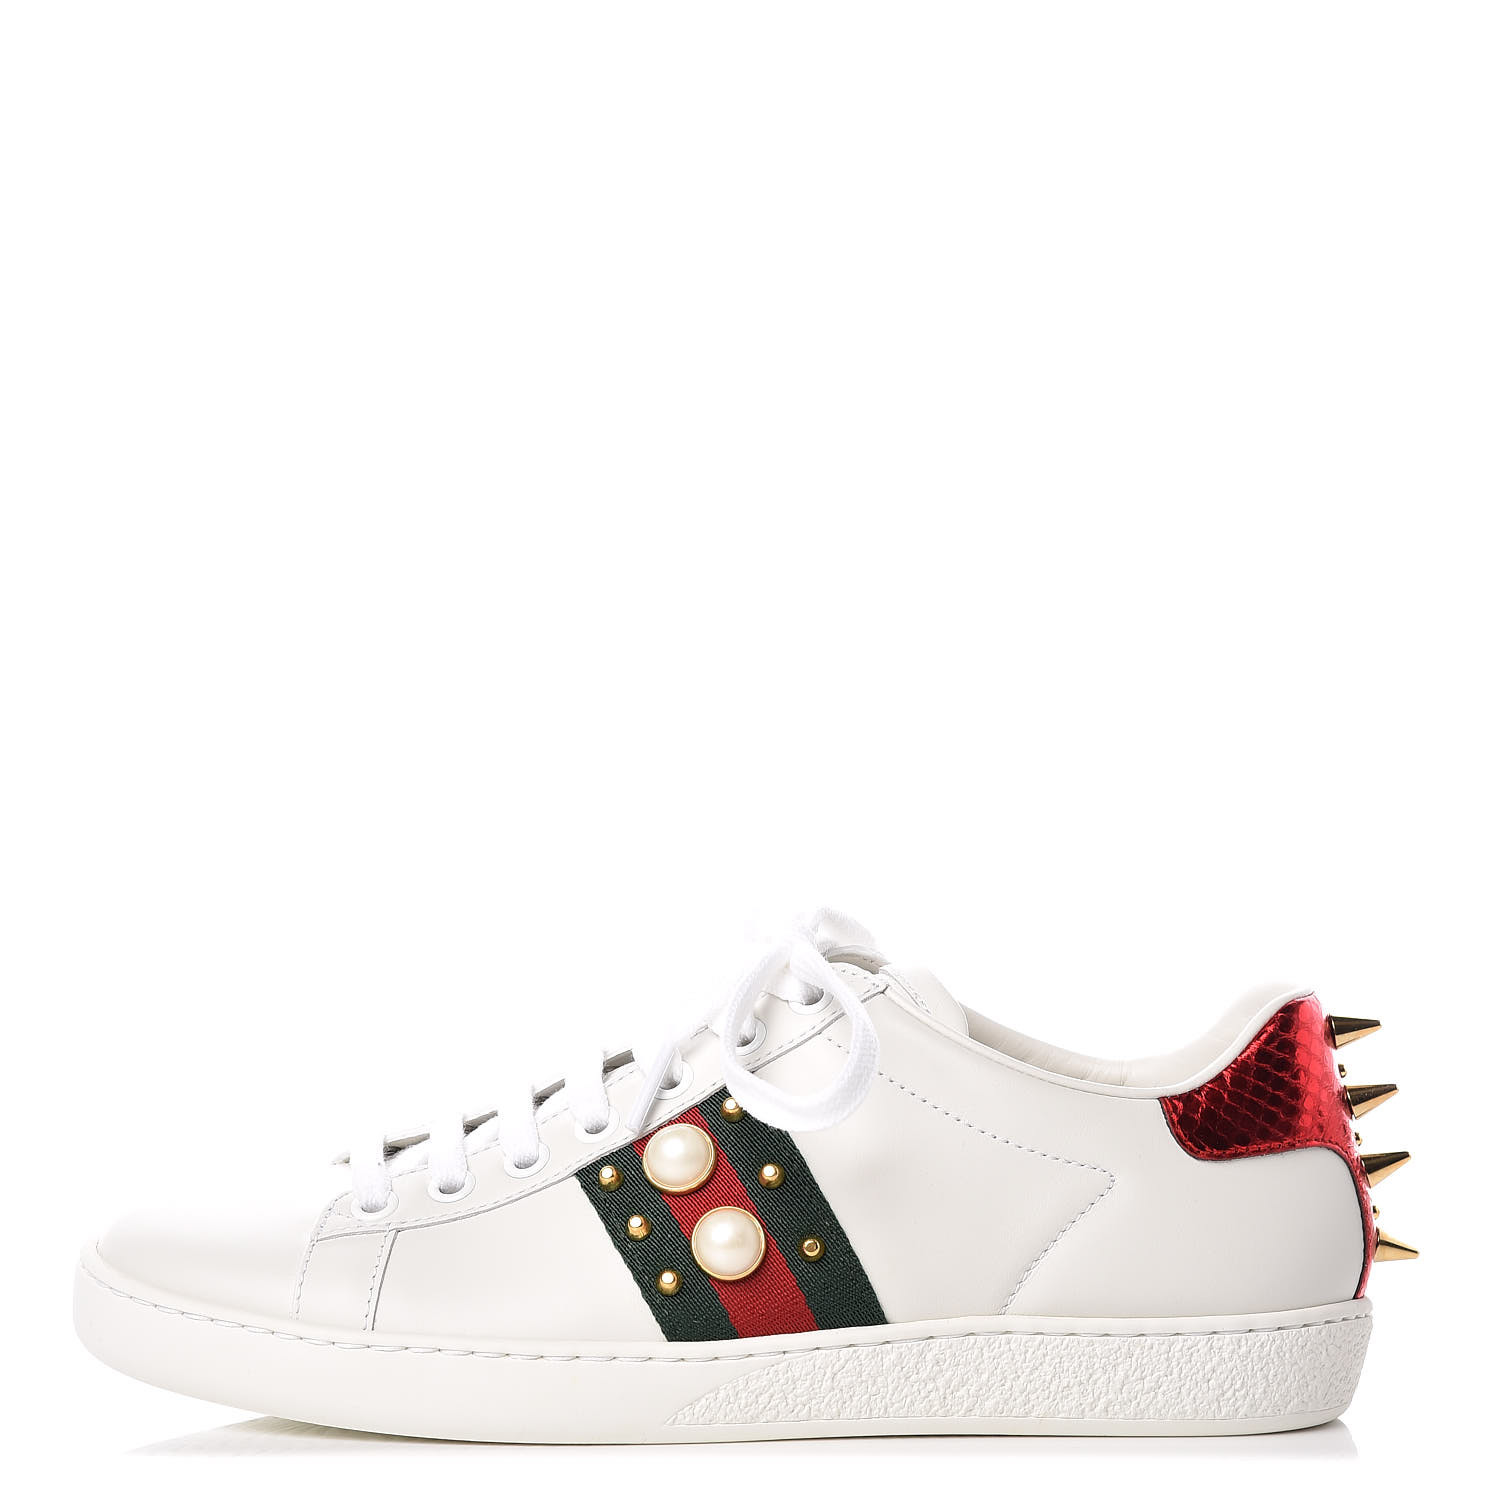 GUCCI Calfskin Web Pearl Studded Womens Ace Sneakers 35.5 White 407166